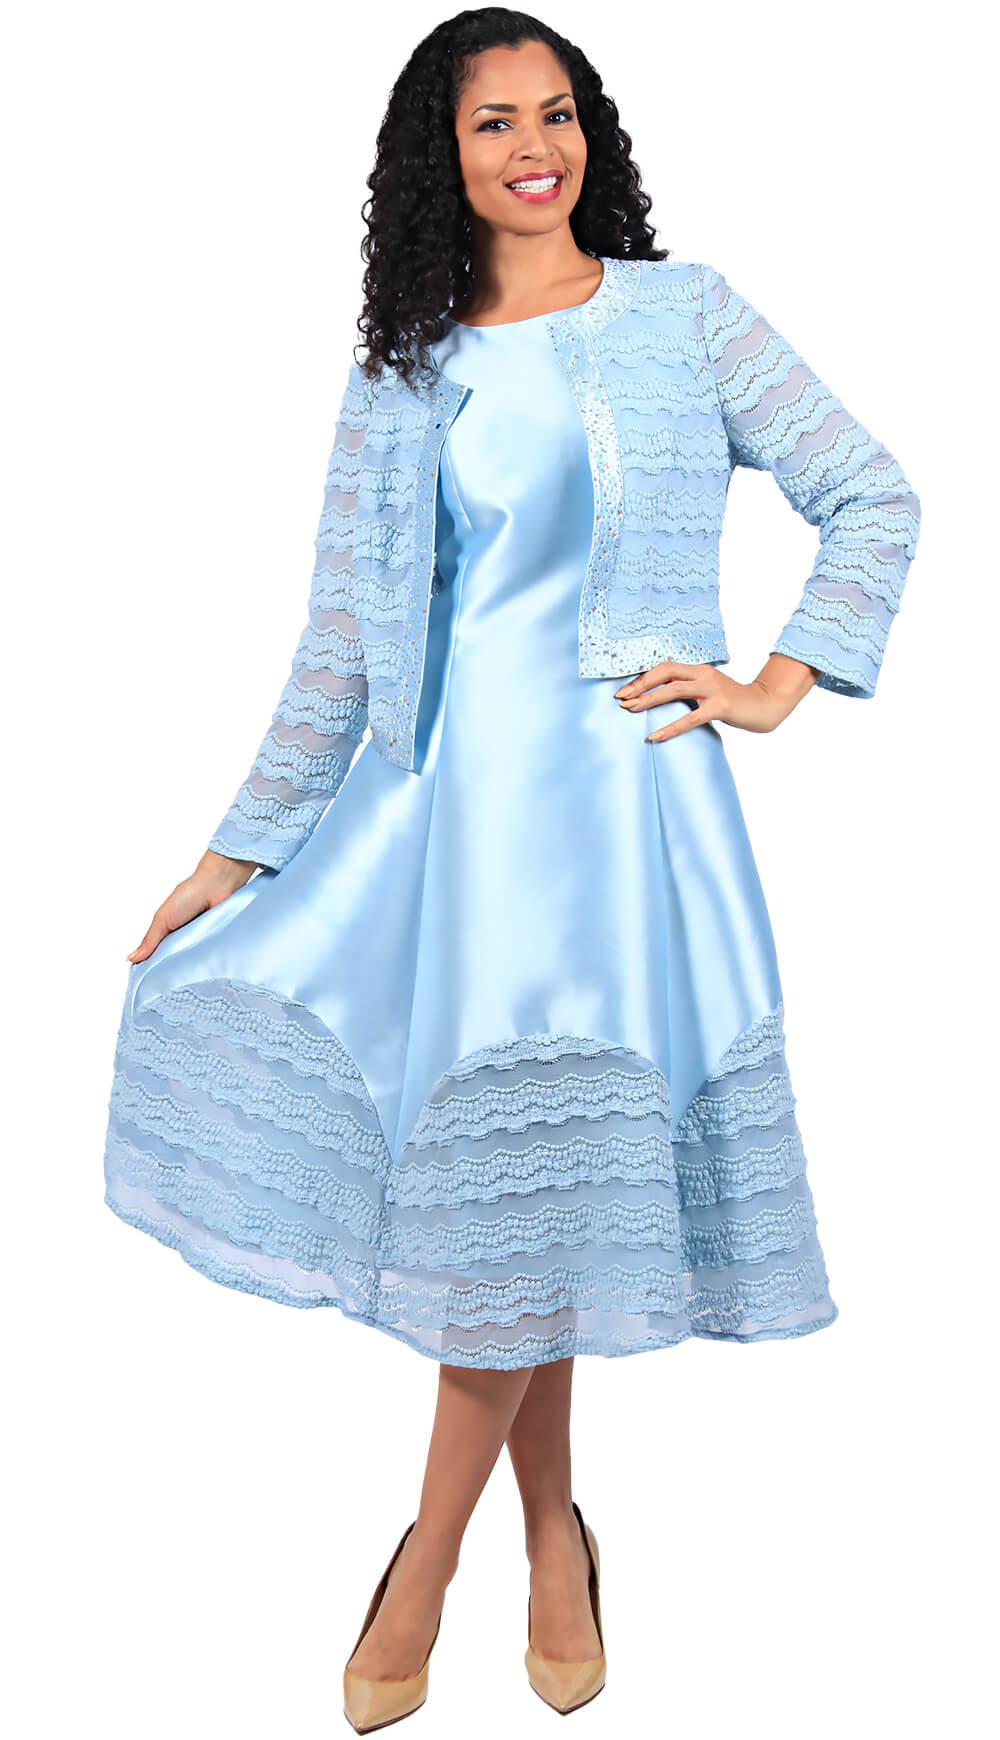 Diana Couture Dress 8686C-Off-White - Church Suits For Less